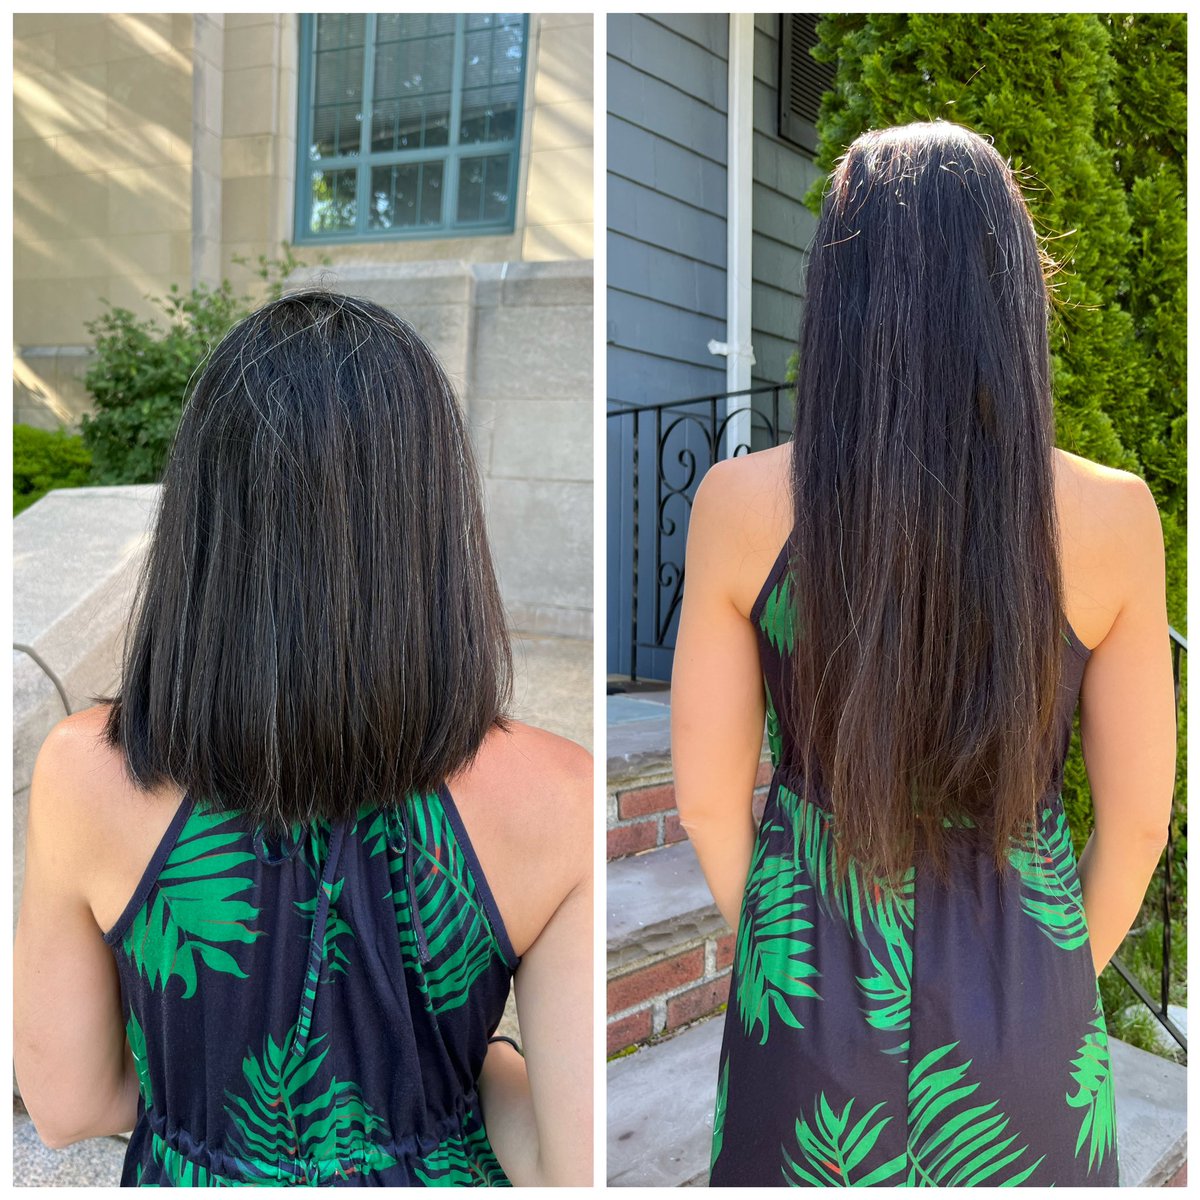 Goodbye long hair! 💇🏻‍♀️ Another hair donation is in the books! ☺️ @CWHL_org #hairdonation